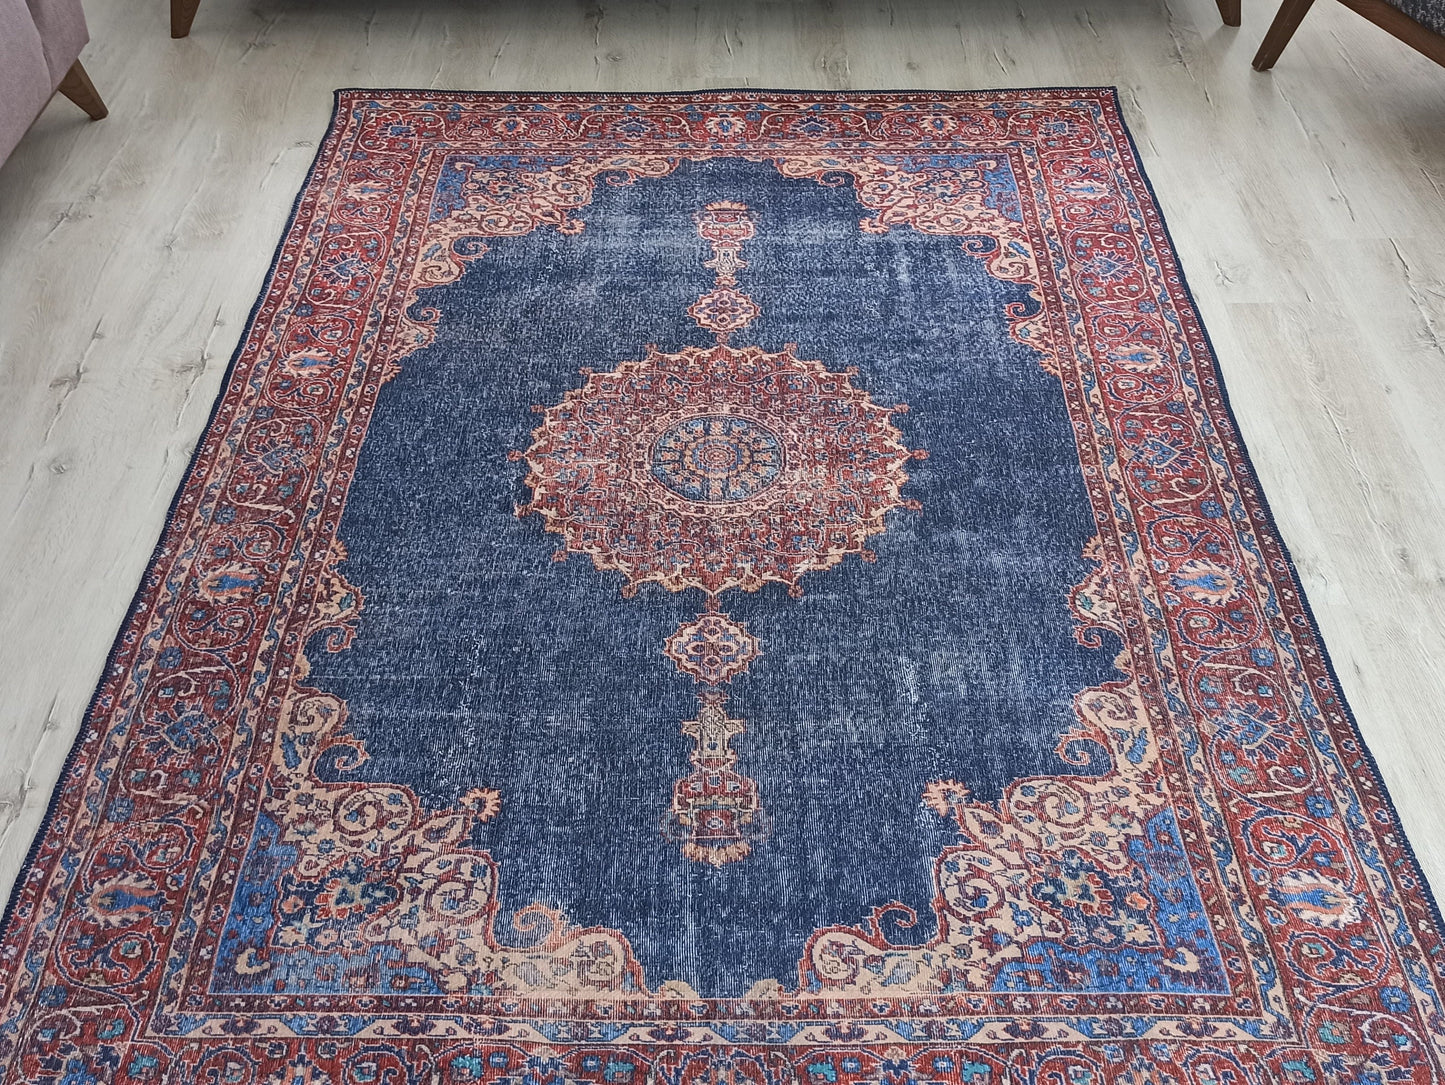 TABRI | Oriental Rug, Persian Pattern, Vintage looks, Bohemian, Living room, Home decor, Area Rug, Mid-century, Navy Blue Rugs, Red, Unique